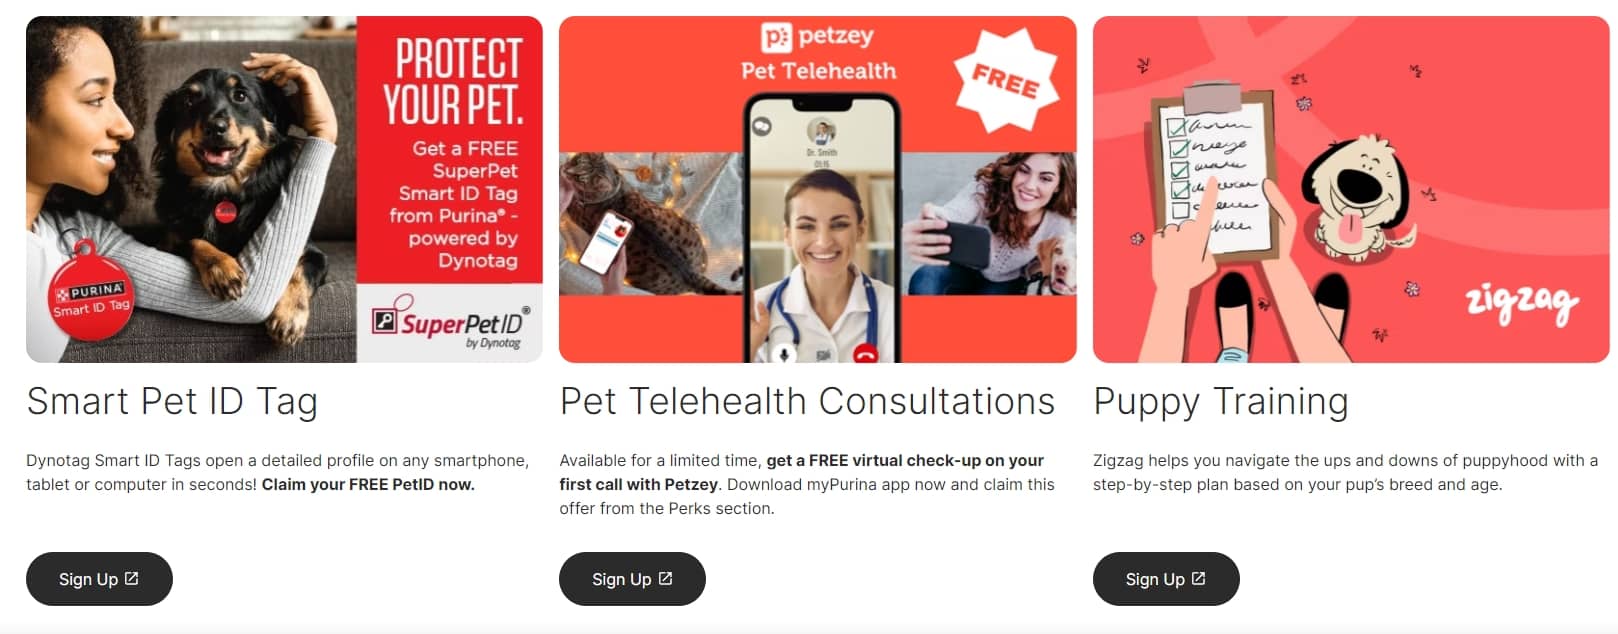 FREE Virtual Pet Check-Up with Petzey from Purina!